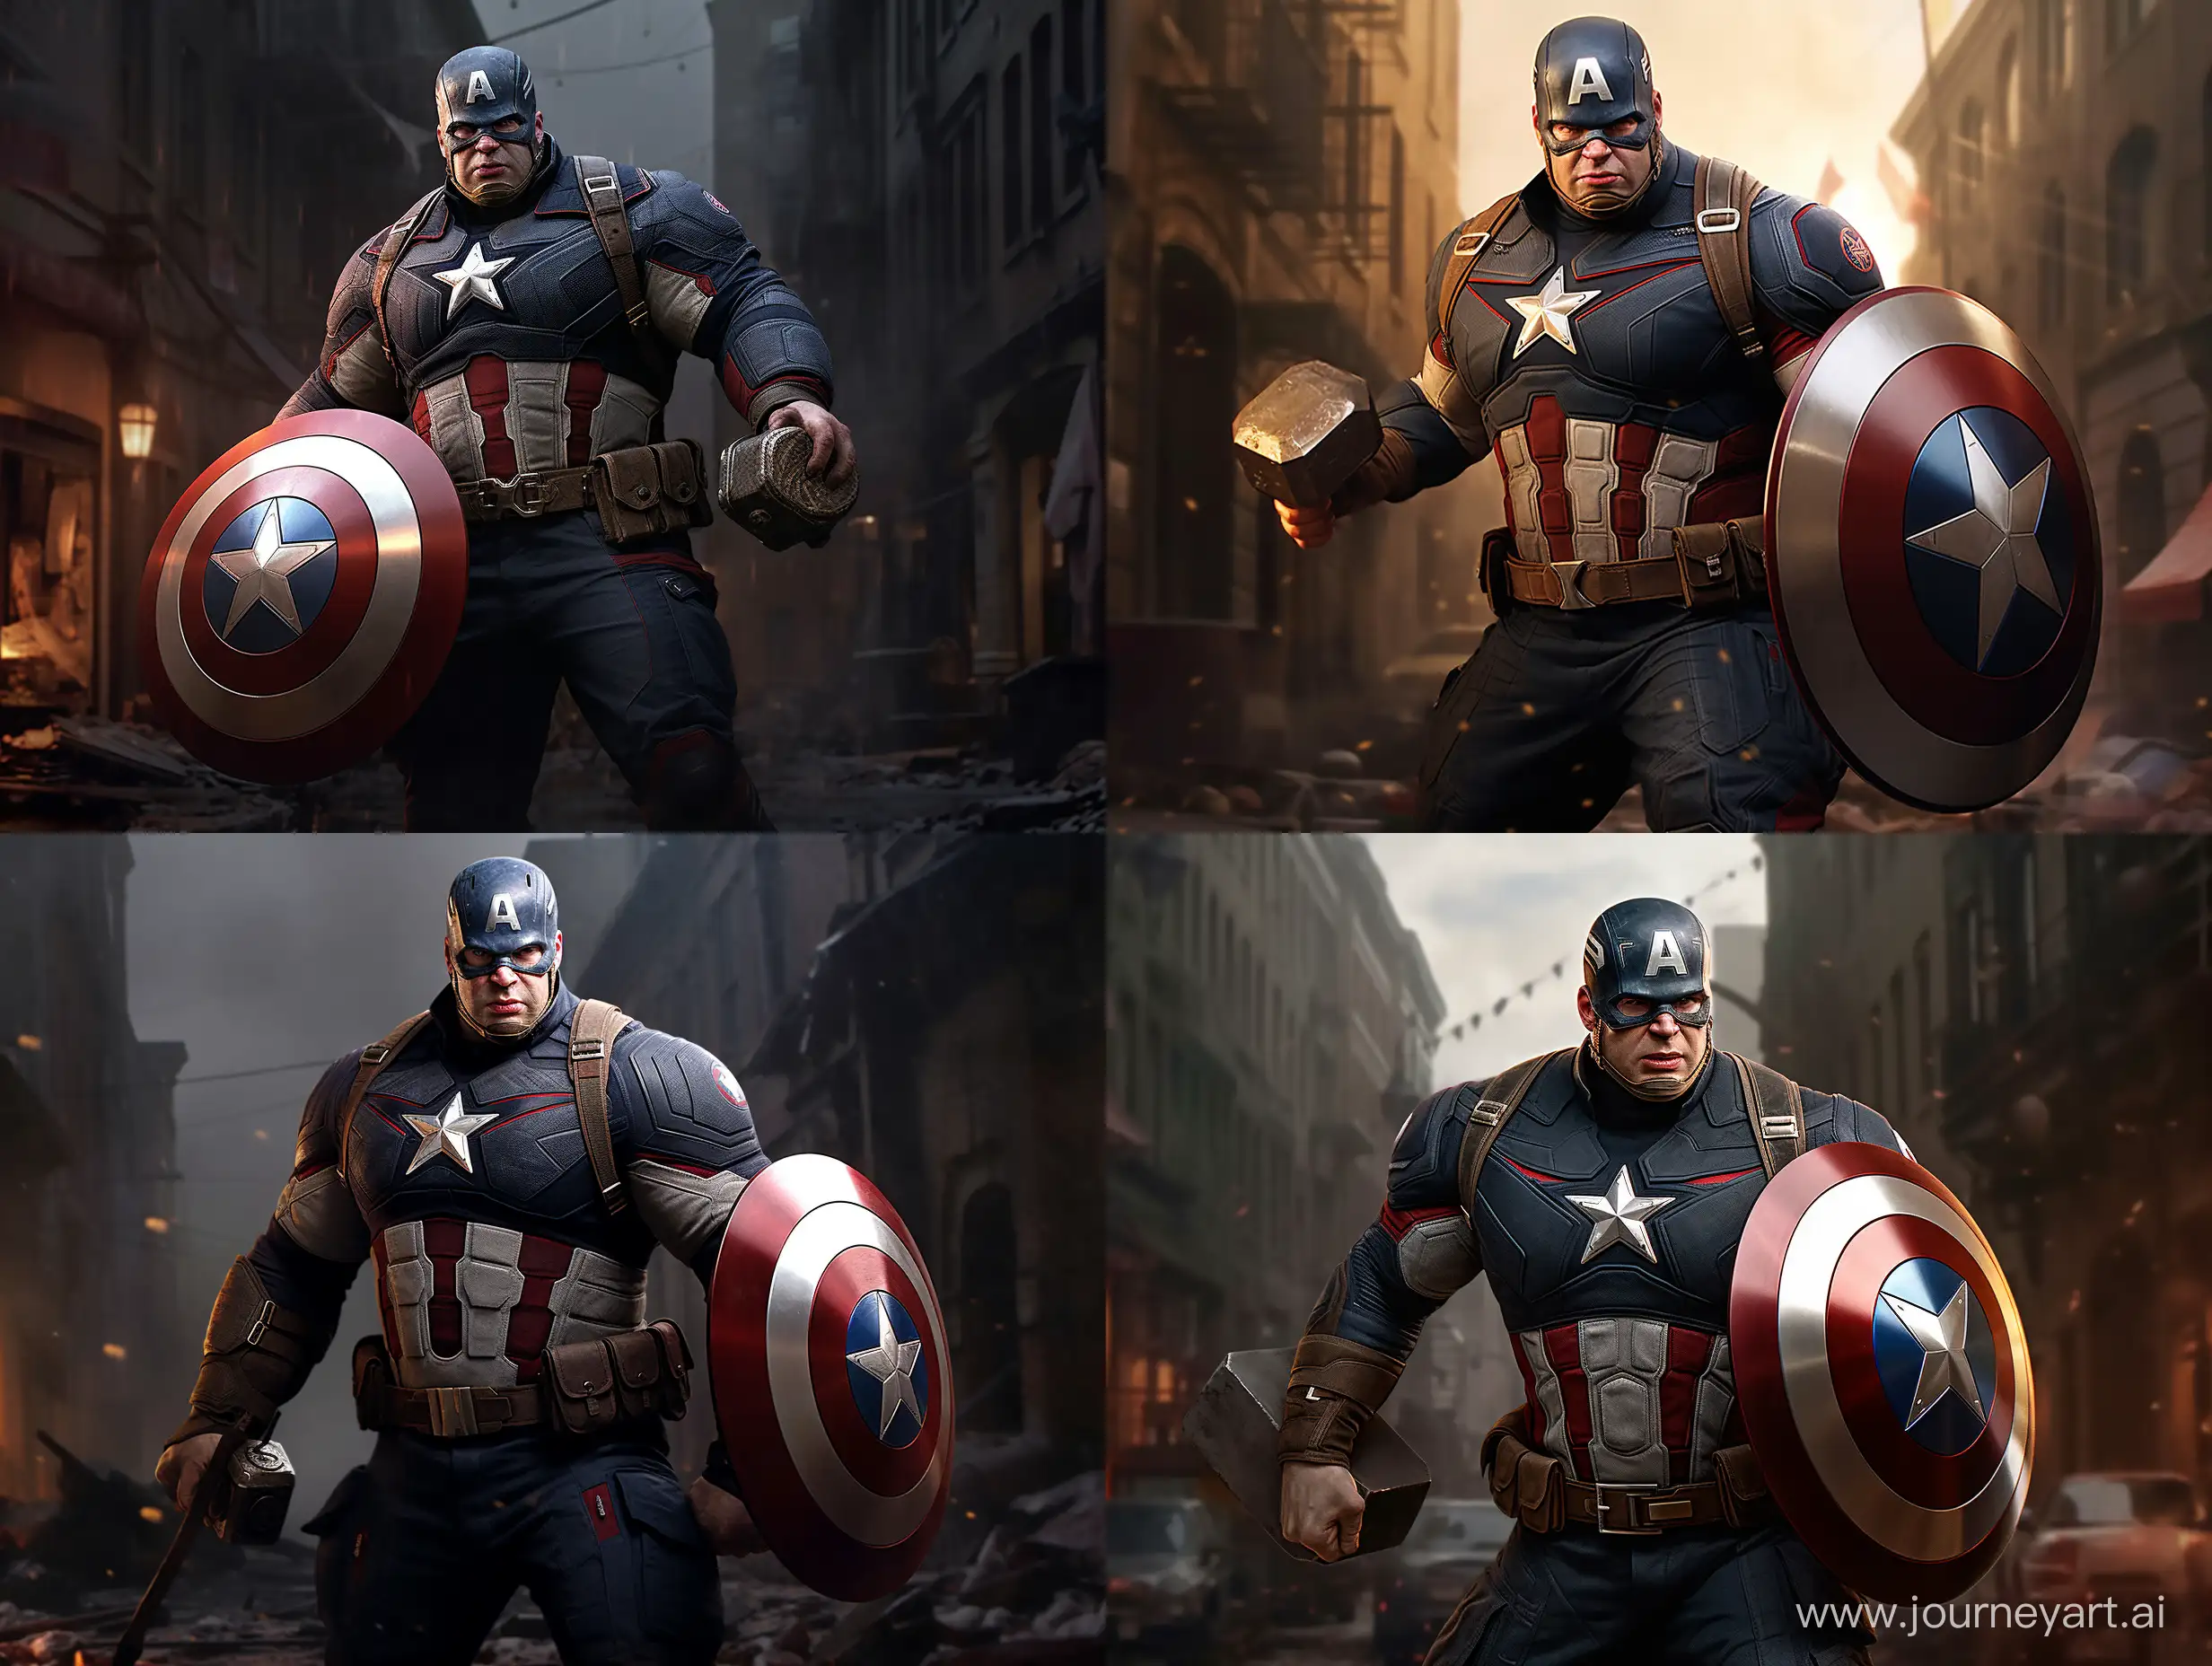 Overweight-Captain-America-Poses-in-Alleyway-with-Cinematic-Realism